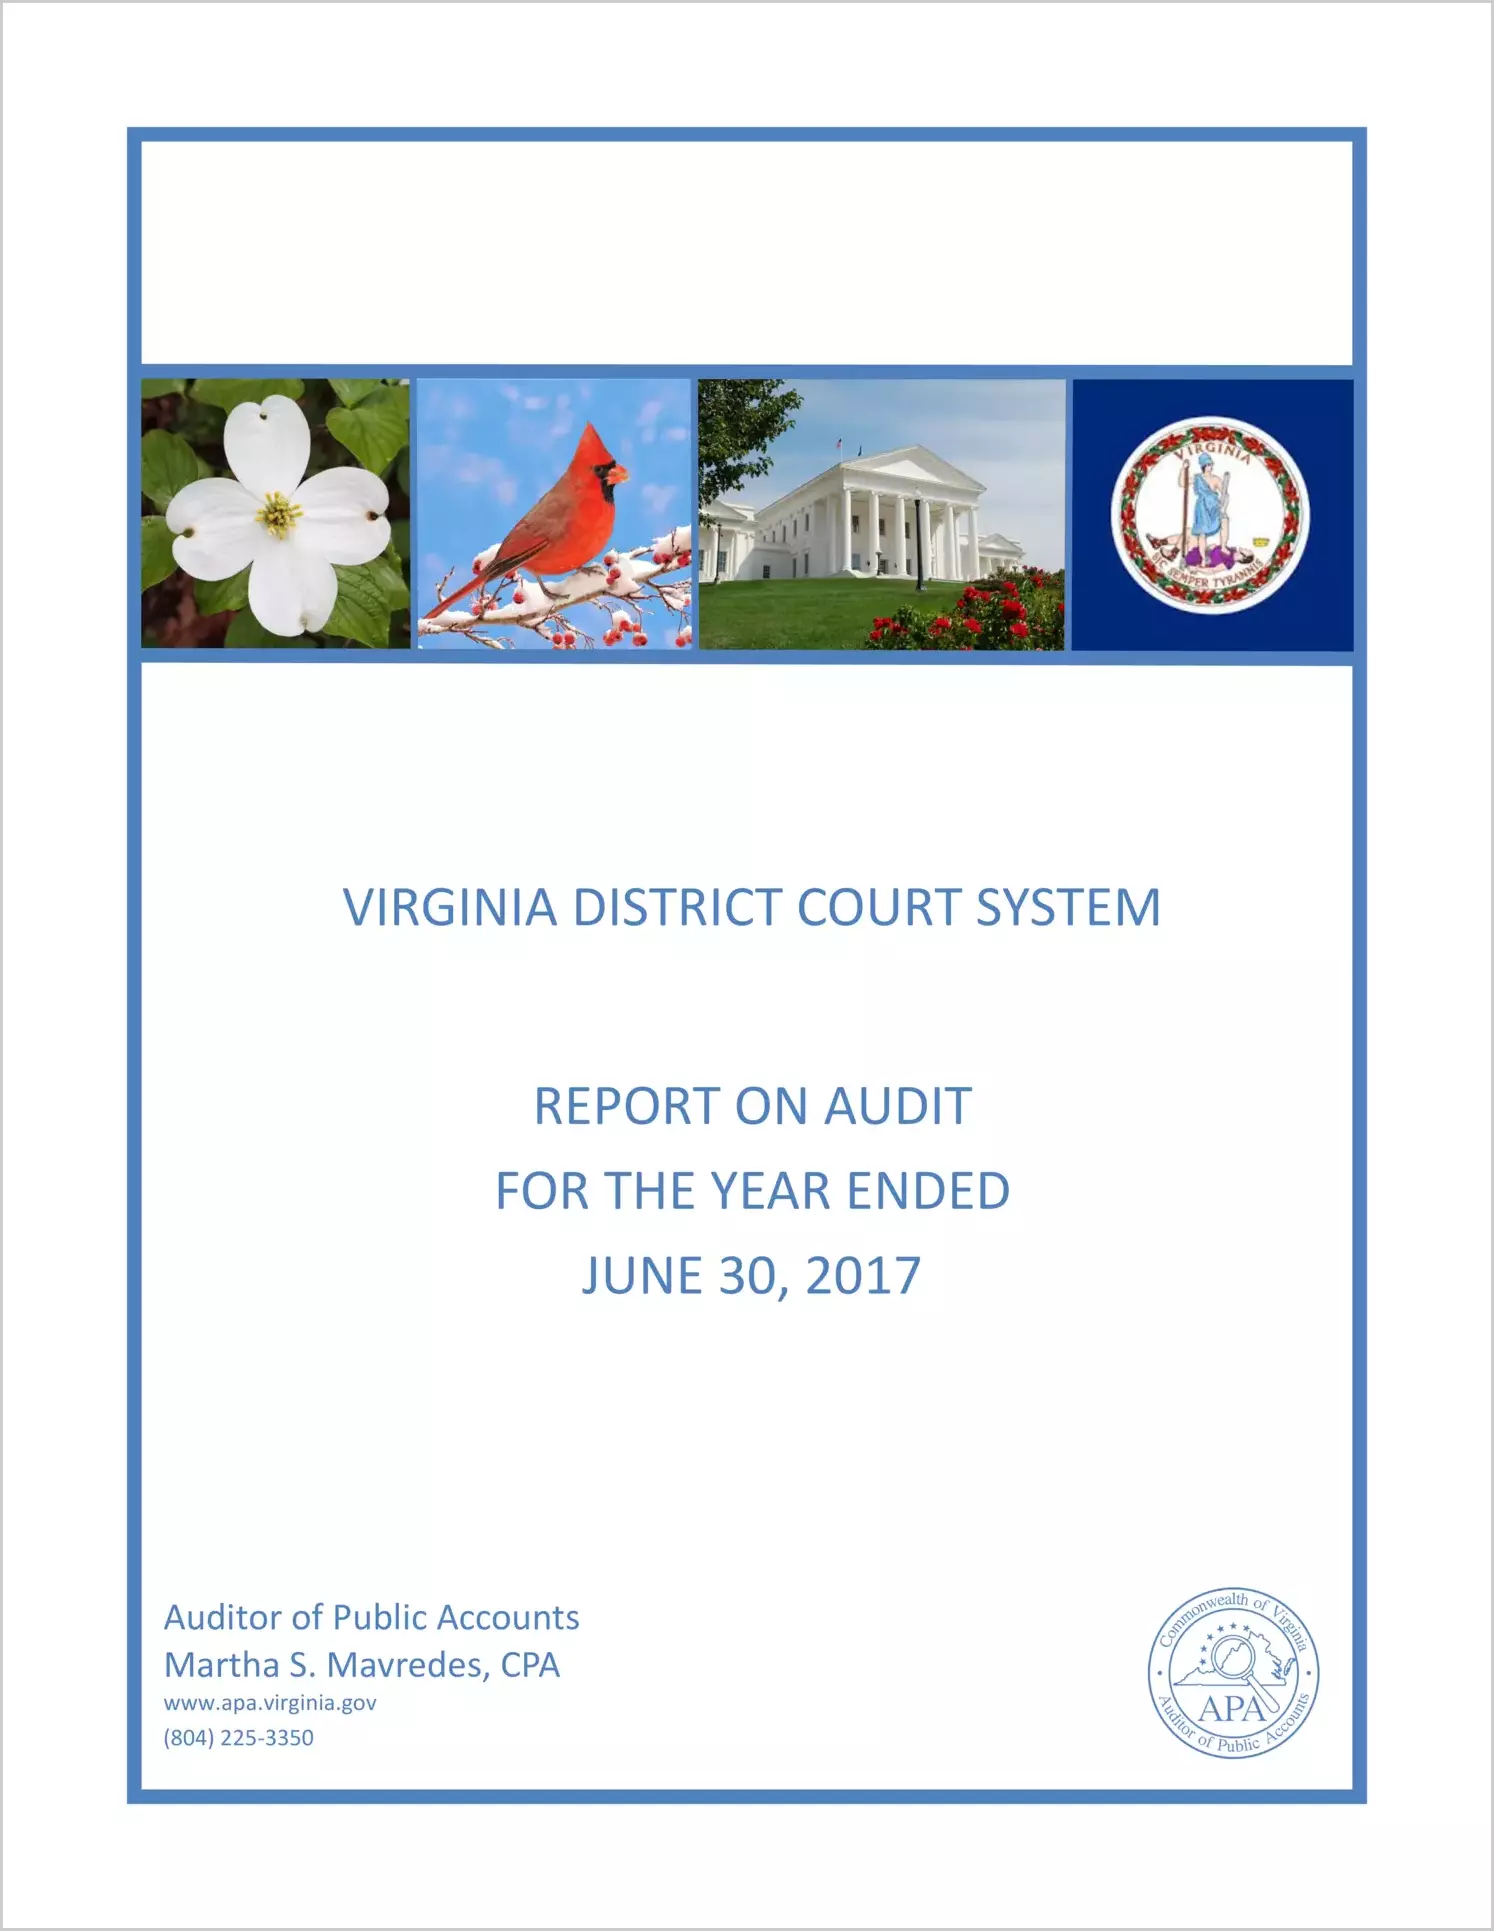 Virginia District Court System for the year ended June 30, 2017